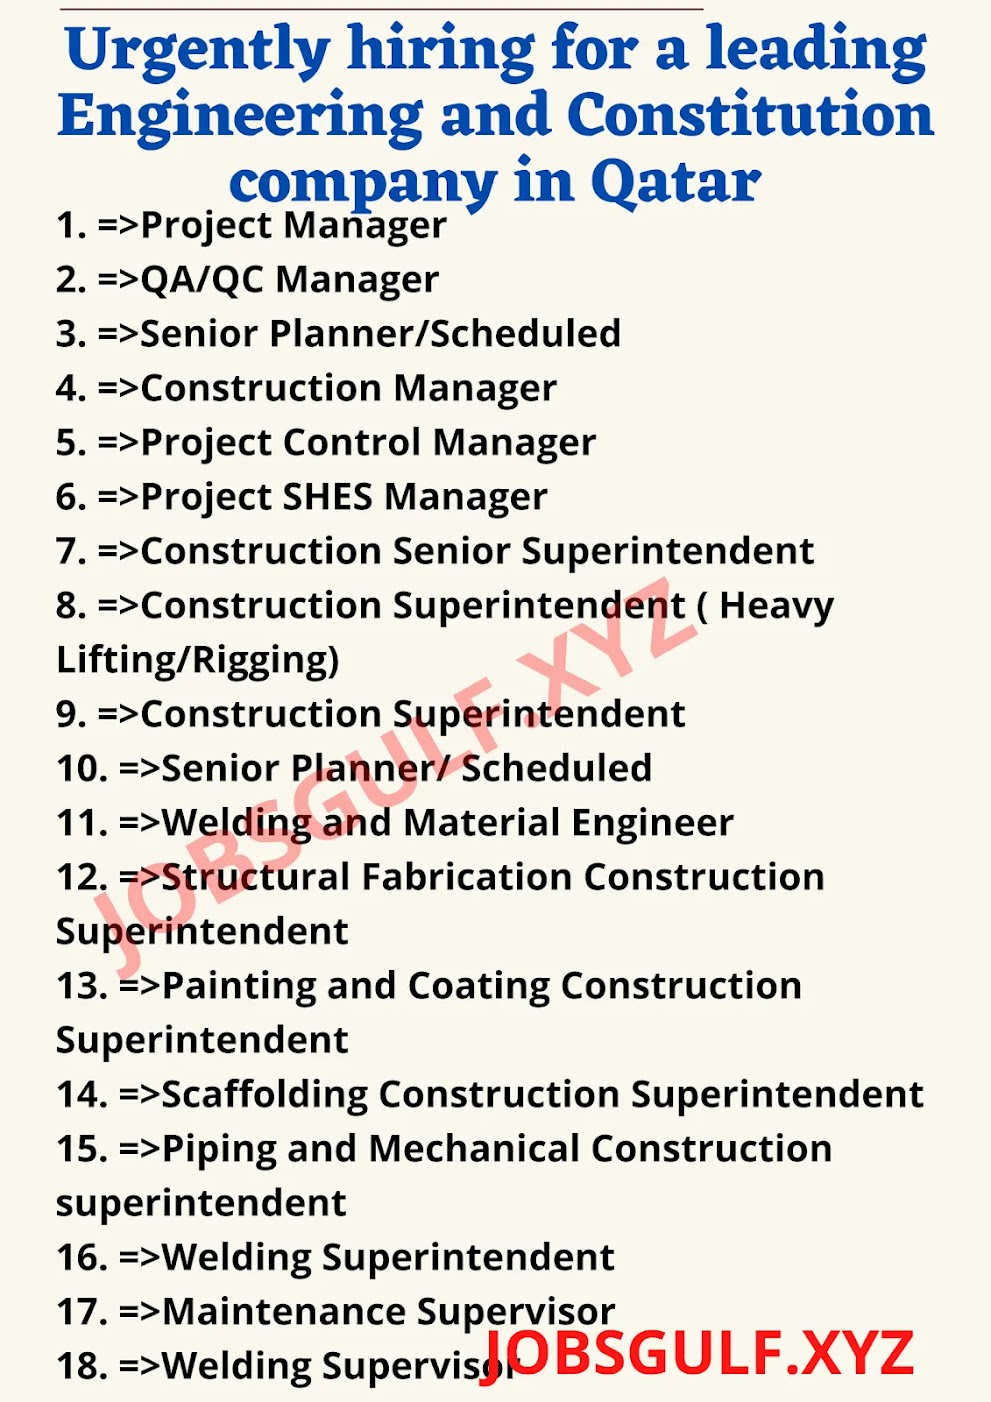 Urgently hiring for a leading Engineering and Constitution company in Qatar